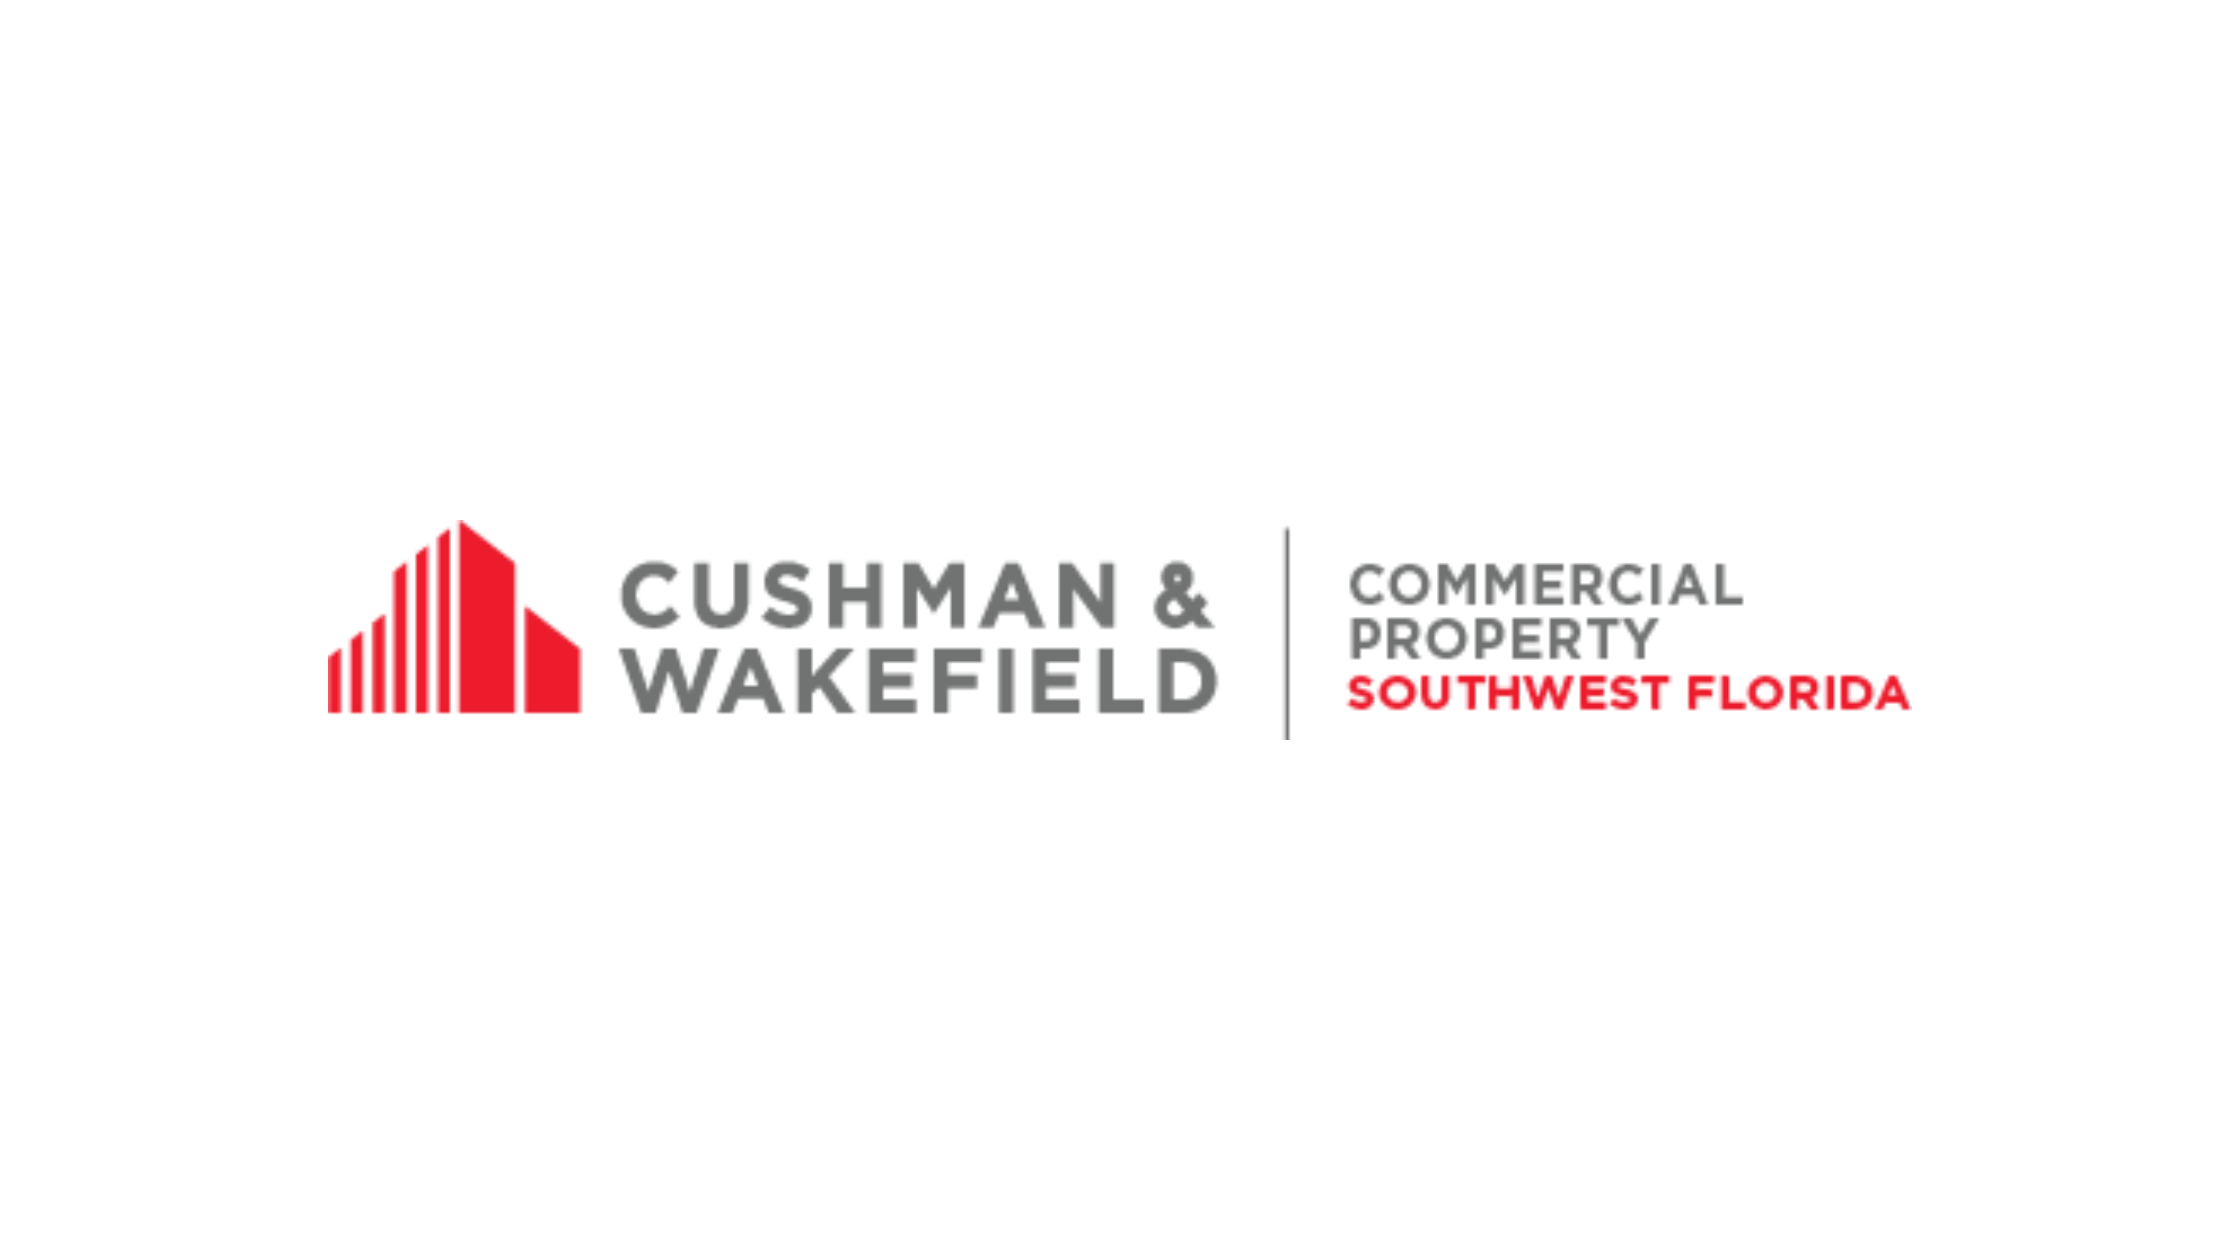 Cushman & Wakefield | Commercial Property Southwest Florida brokers $6.5 million sale of Fort Myers office building